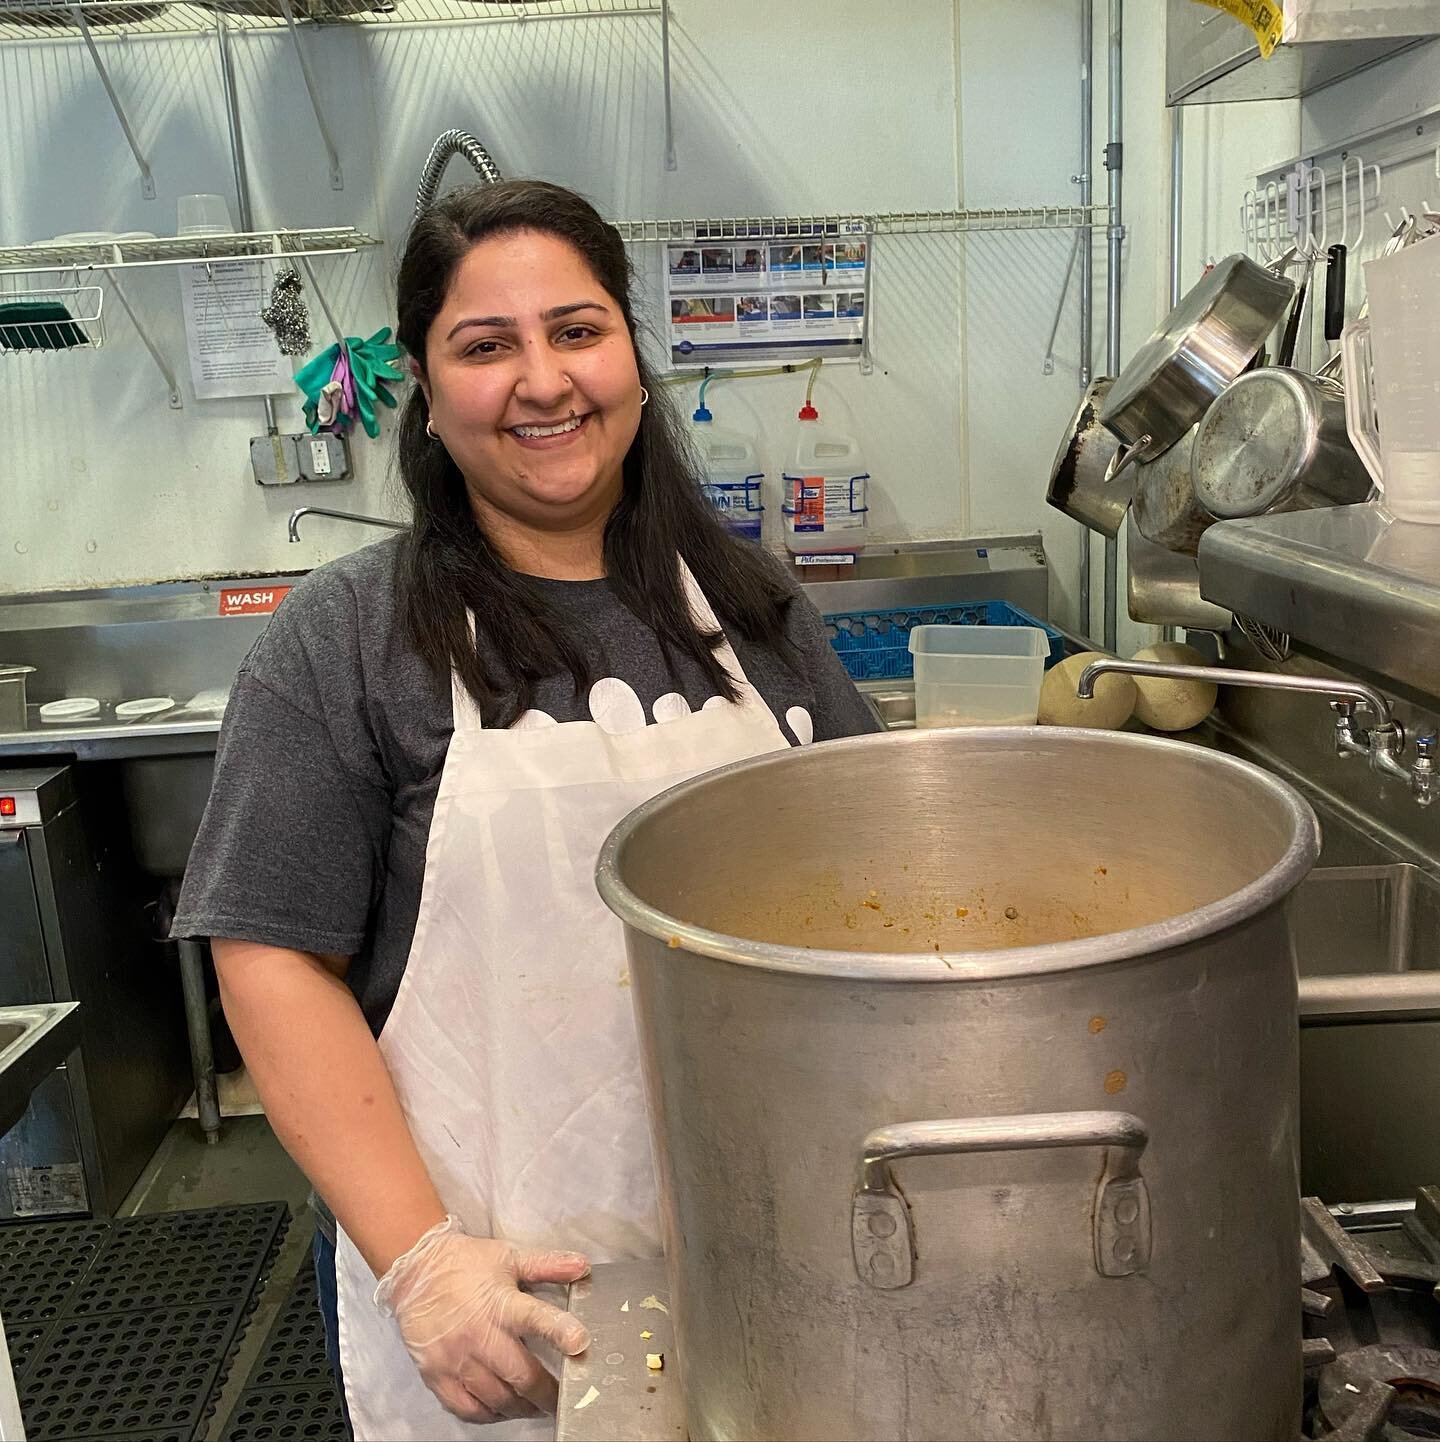 The food was so good the first time she cooked, that we asked Masooma to come back and take over our kitchen again!! 

TODAY from 11:00-2:30, Masooma will be serving up traditional Pakistani cuisine, including Chicken Karahi (gf), Potato Masala (v, g